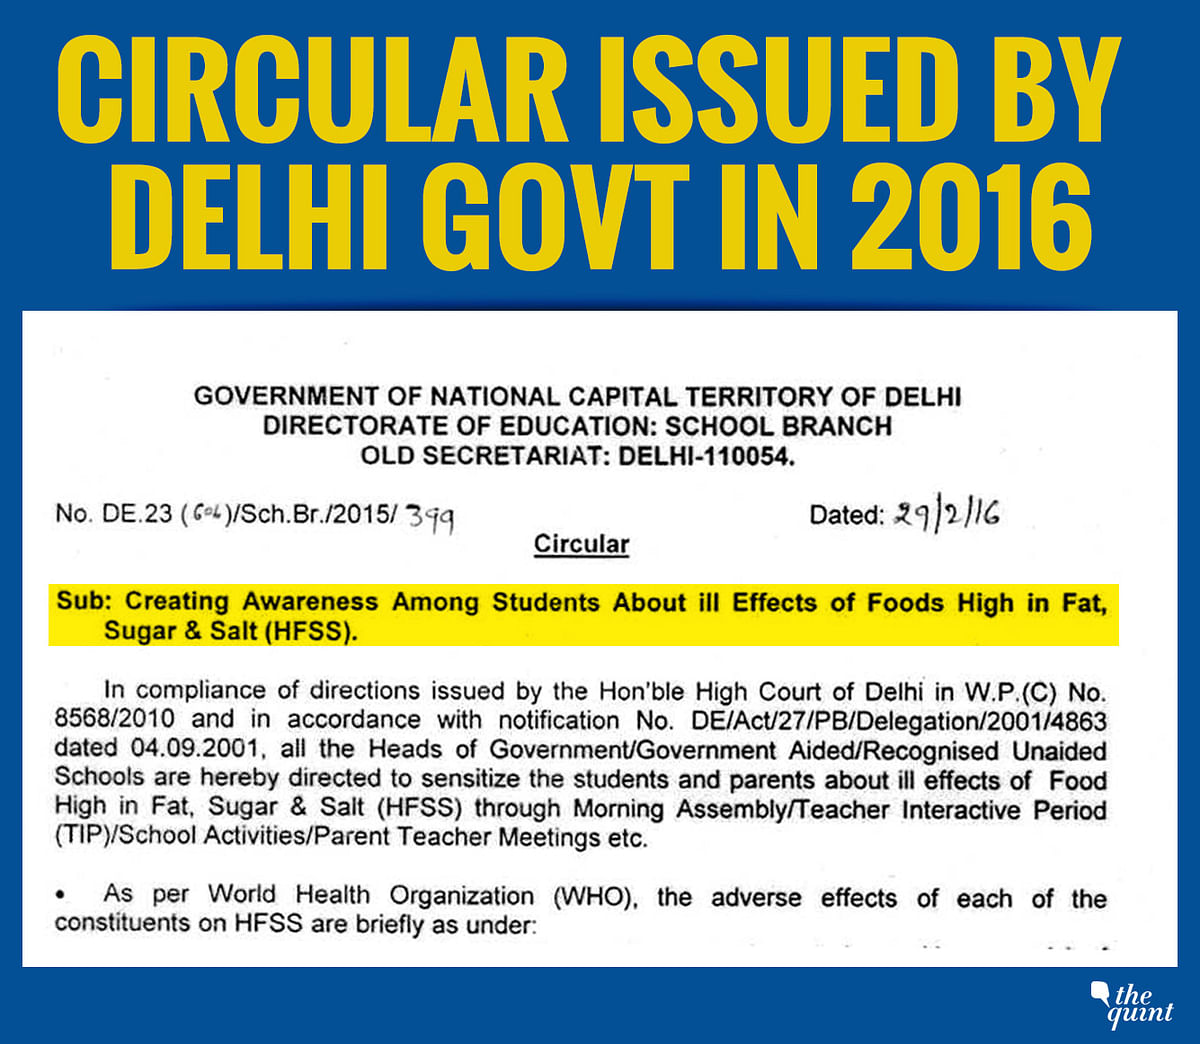 Despite a court order, Delhi government has been unable to curb easy availability of junk foods outside schools.